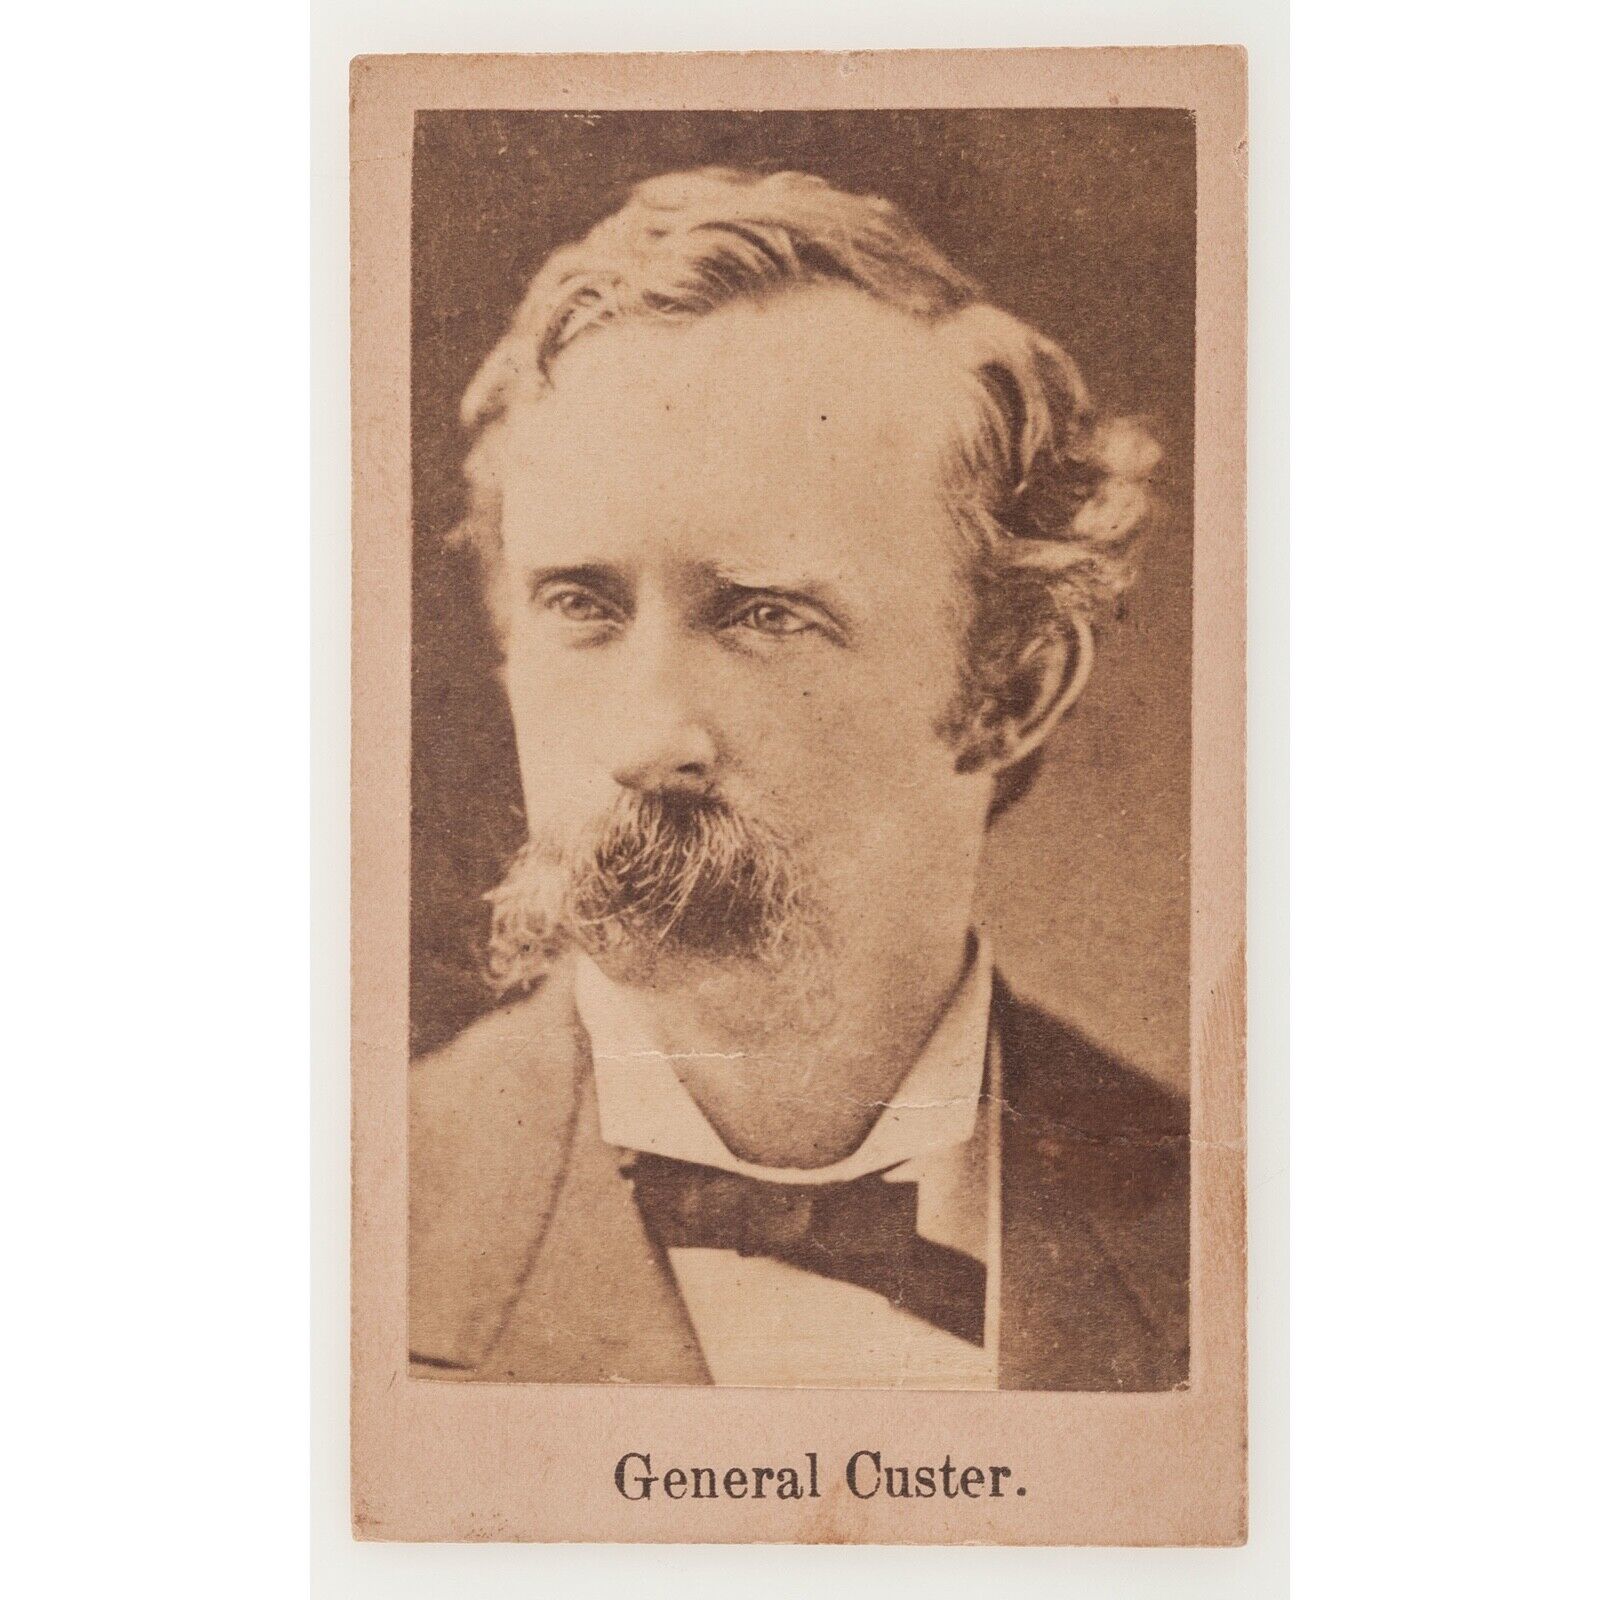 Second-to-Last CDV Photograph of George A. Custer Taken Before Little Bighorn